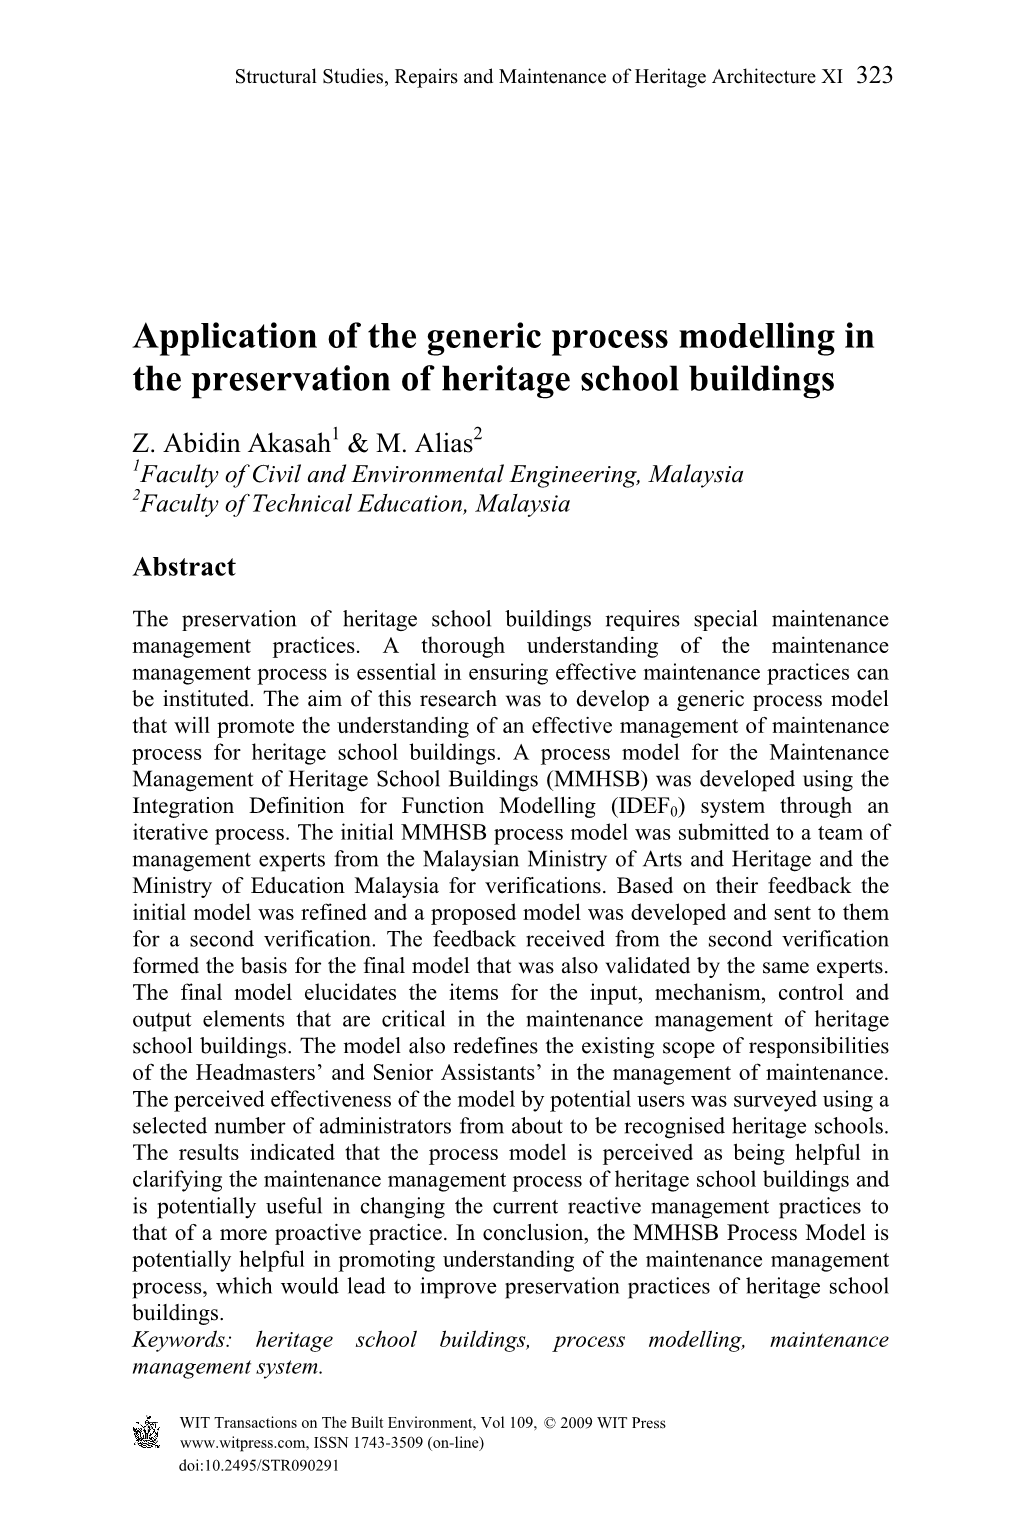 Application of the Generic Process Modelling in the Preservation of Heritage School Buildings